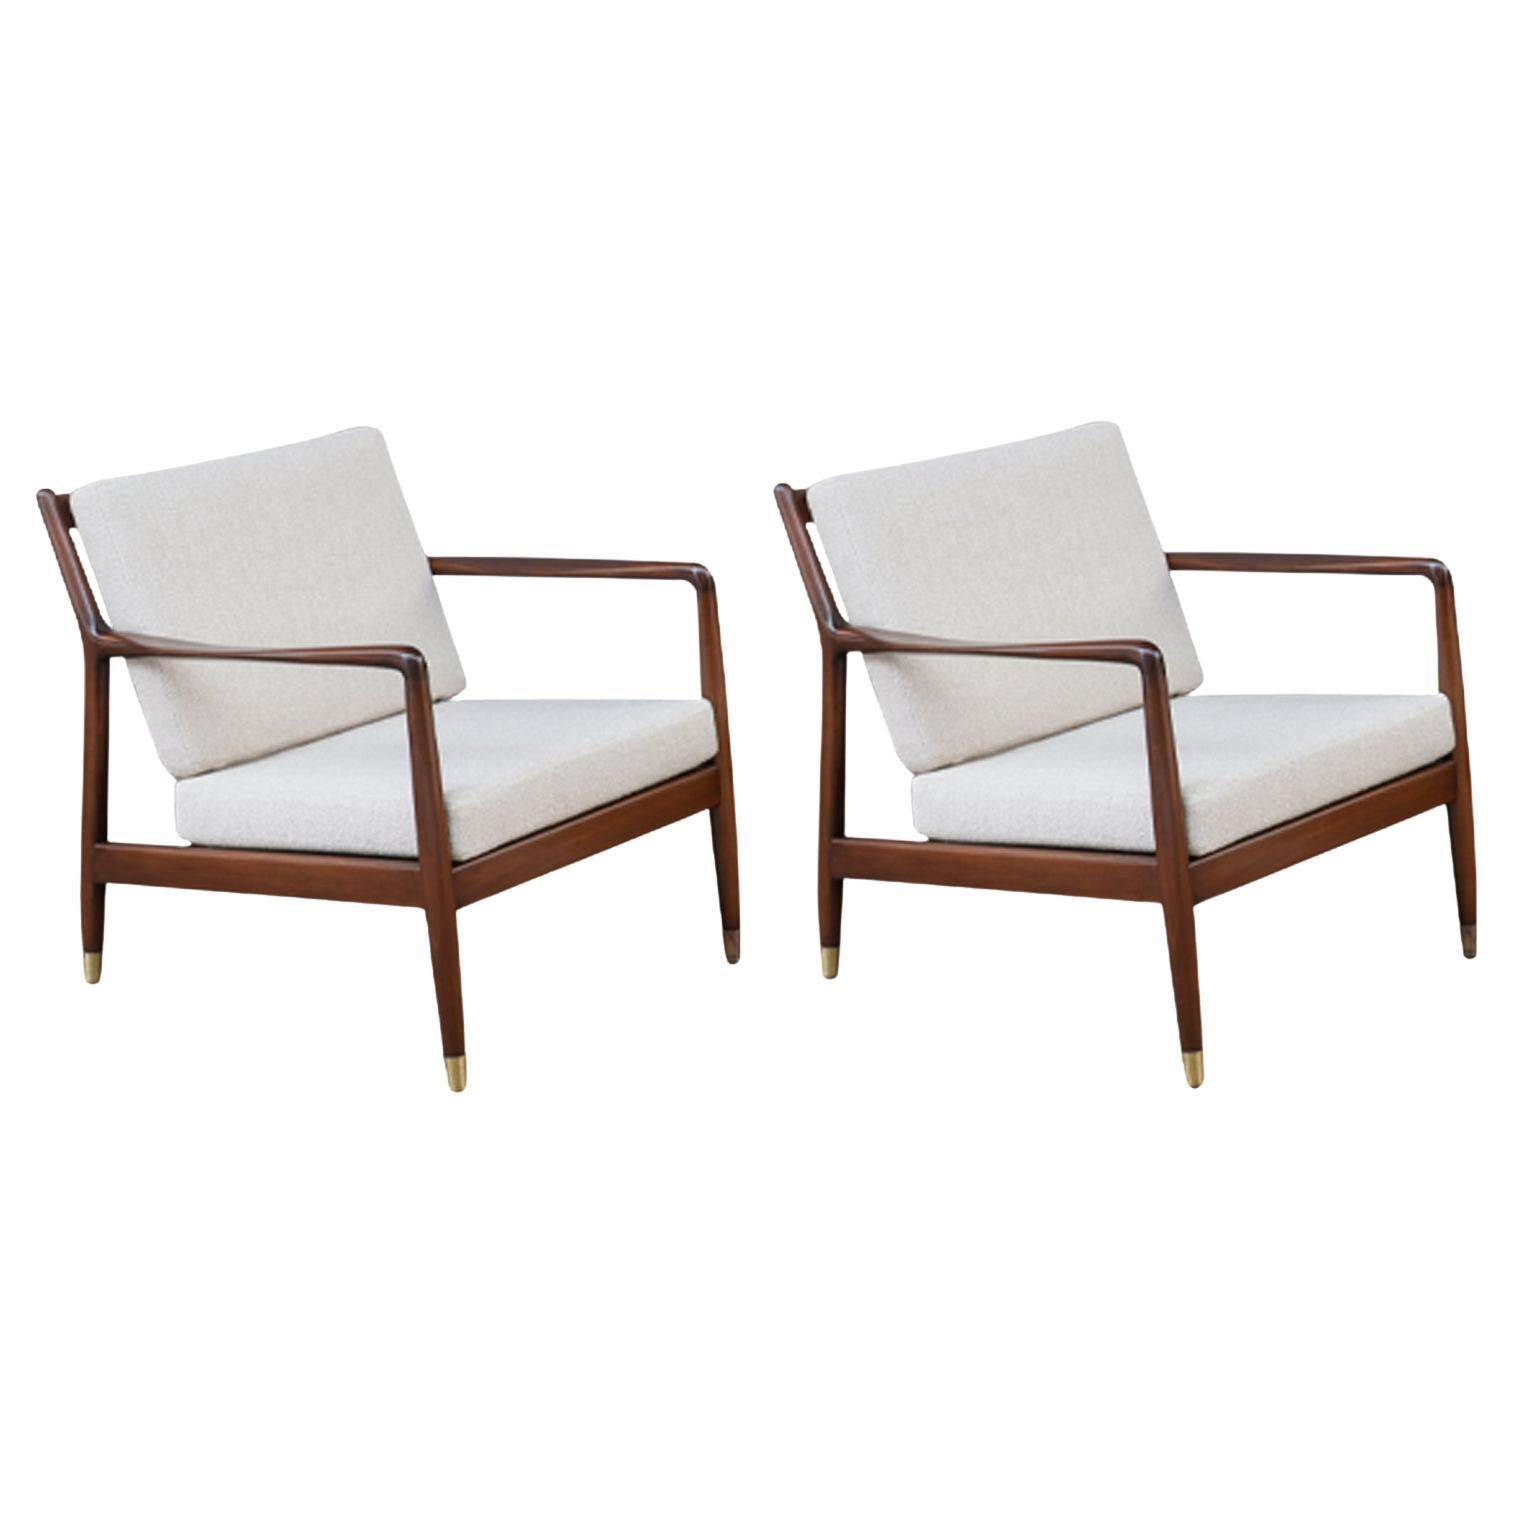 Expertly Restored - Scandinavian Modern Lounge Chairs by Folke Ohlsson for Dux  For Sale